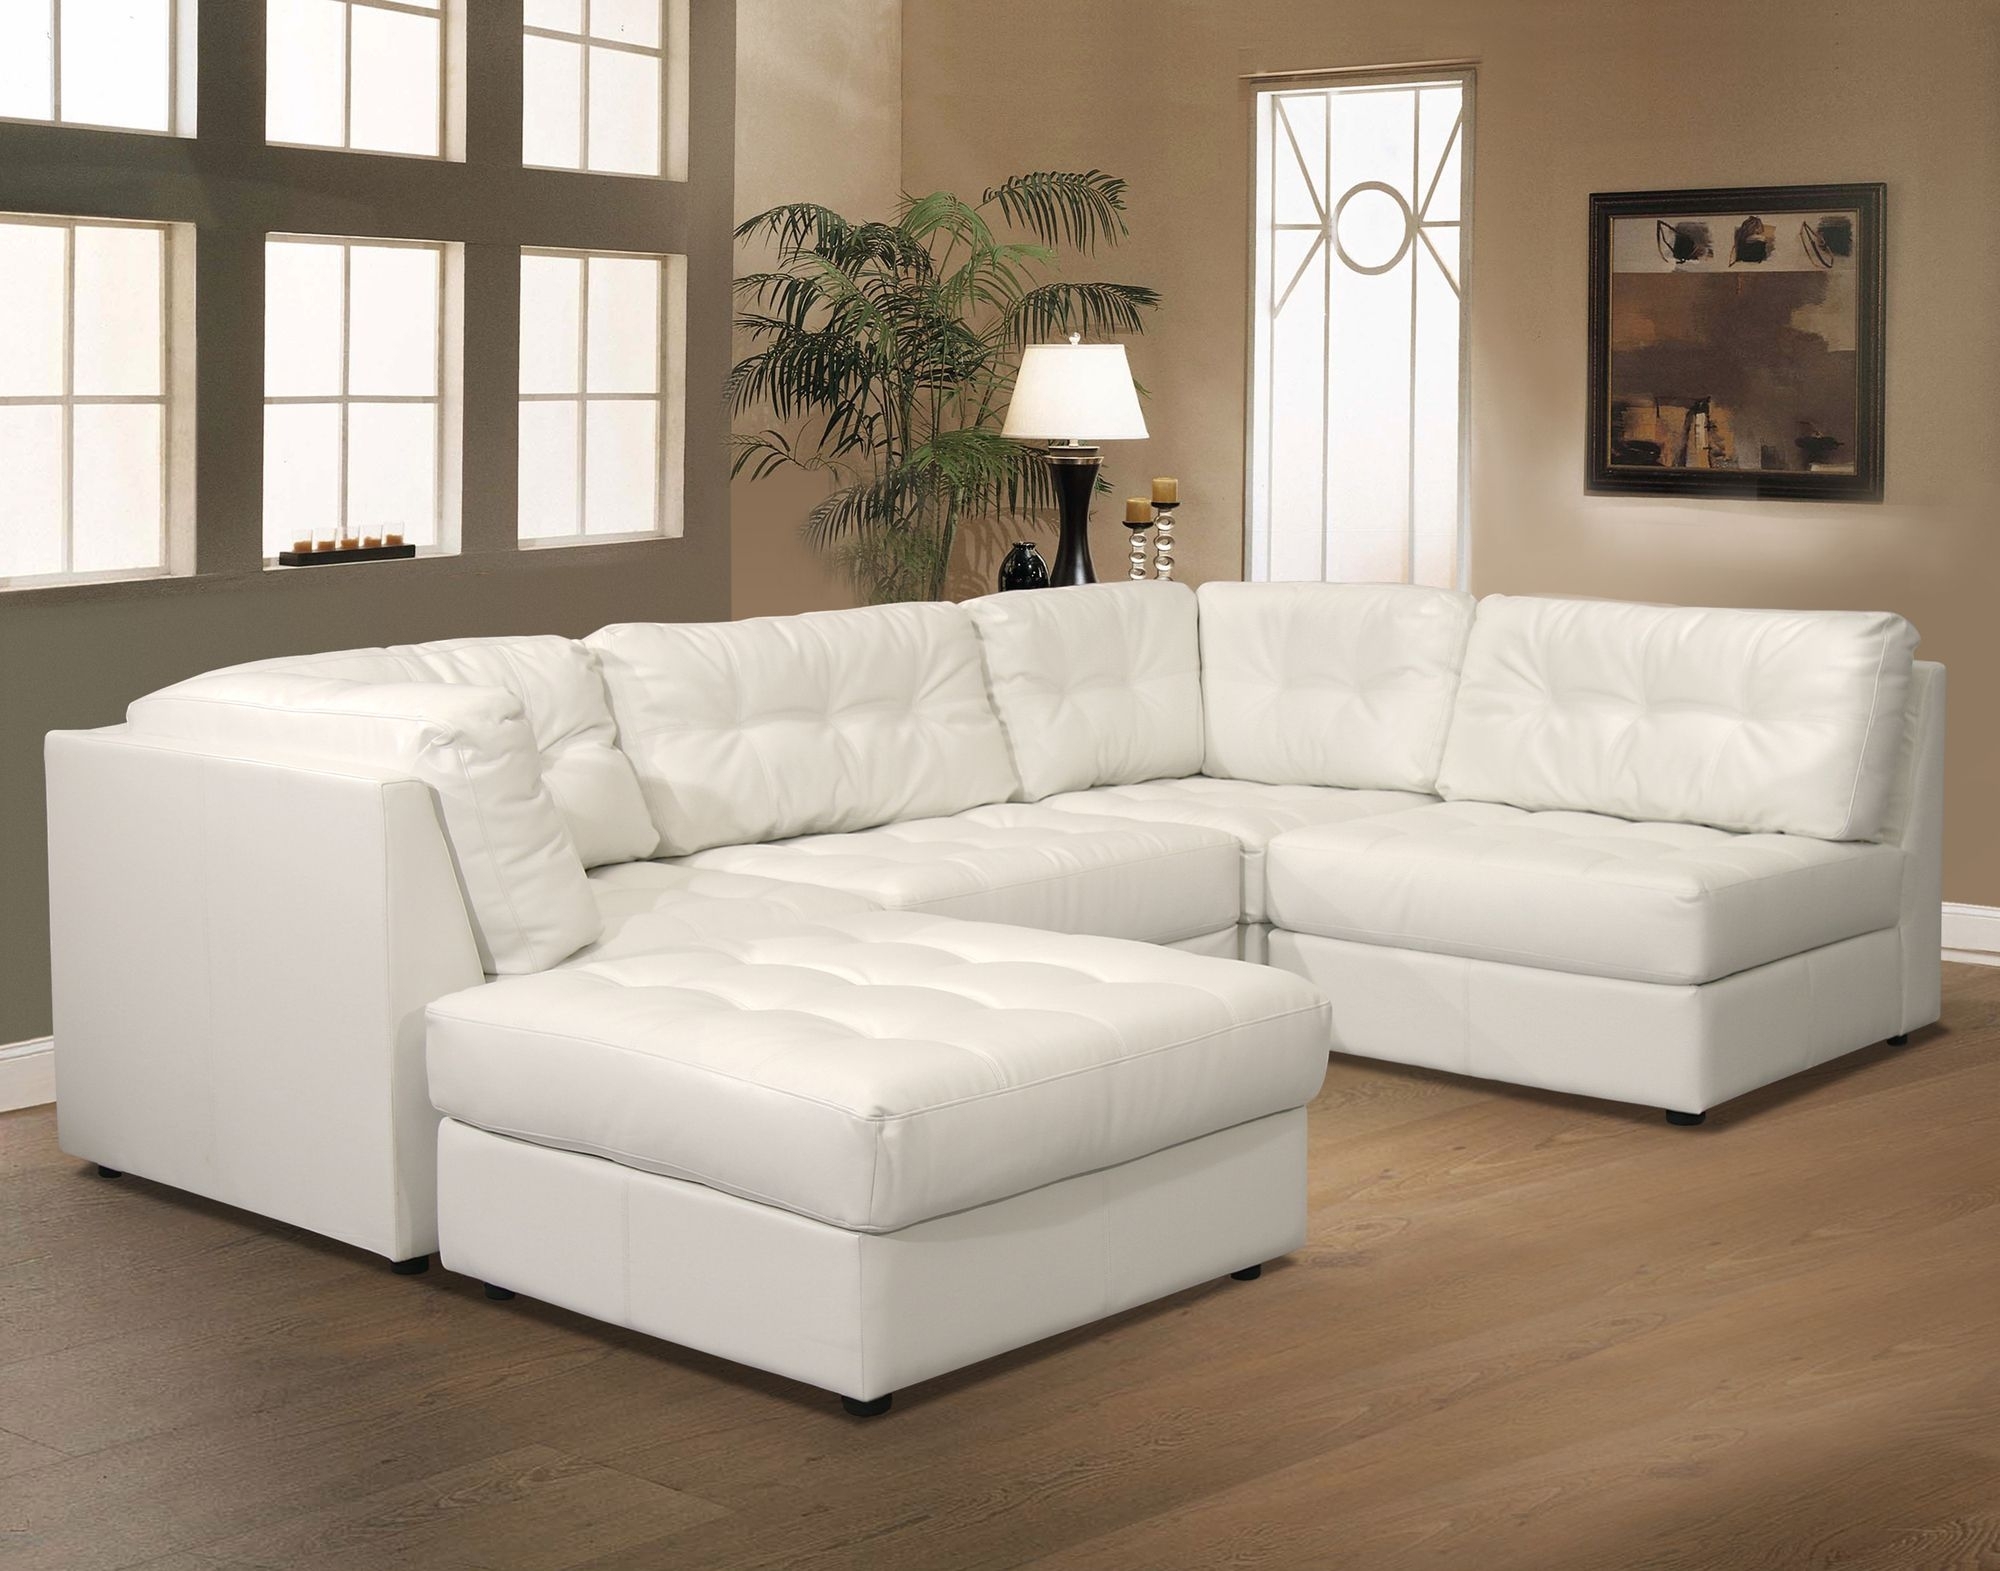 https://foter.com/photos/title/small-white-leather-sectional.jpg